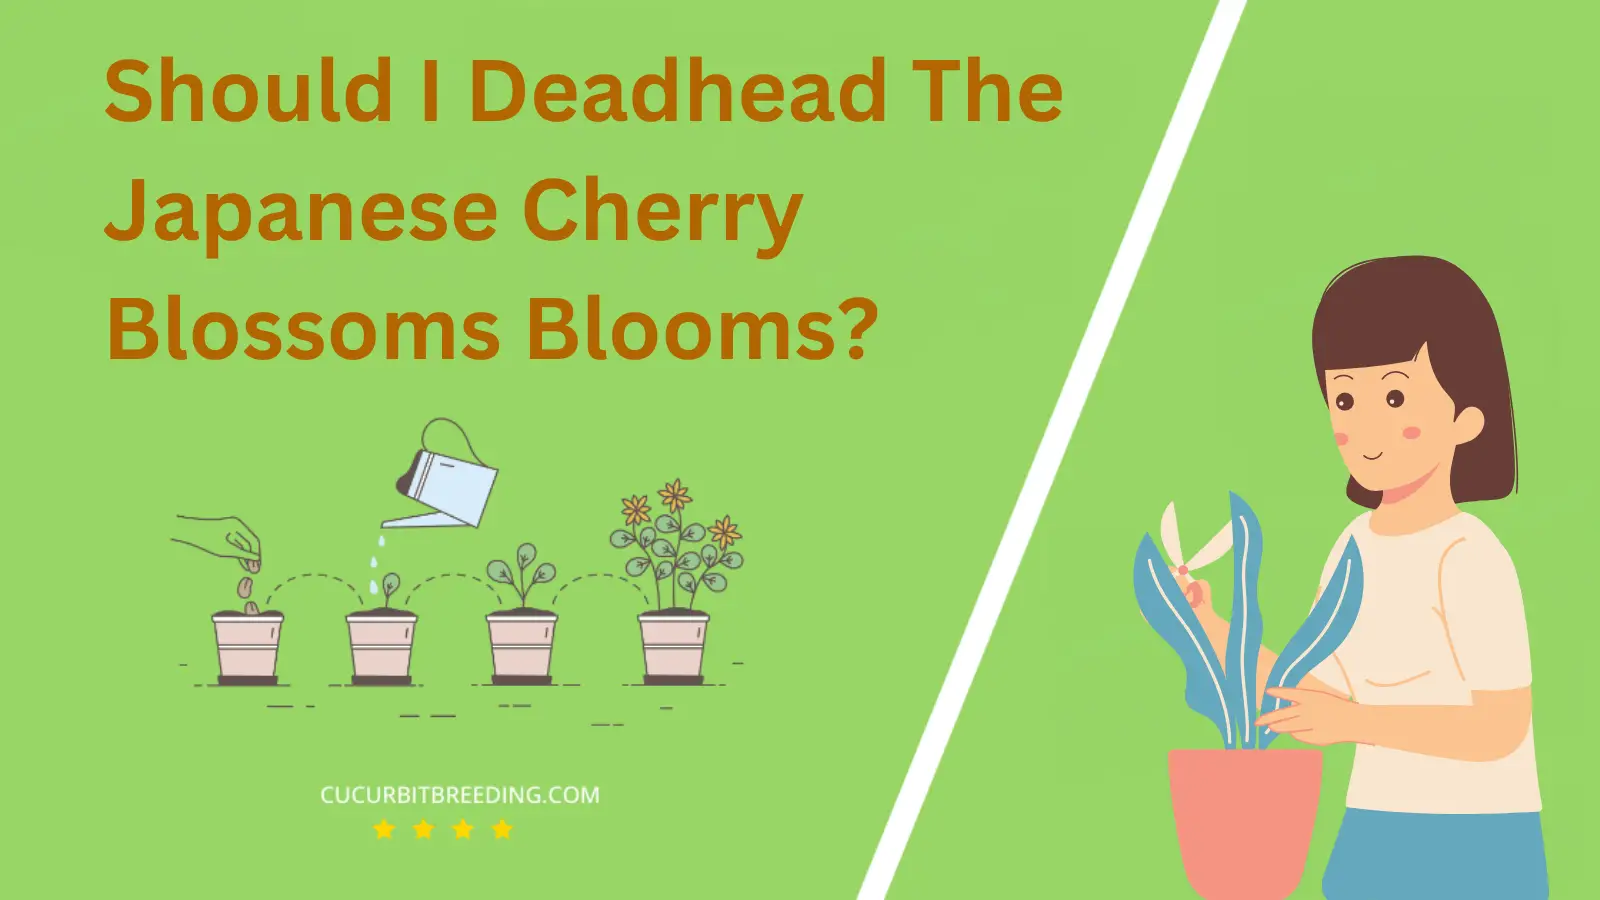 Should I Deadhead The Japanese Cherry Blossoms Blooms?